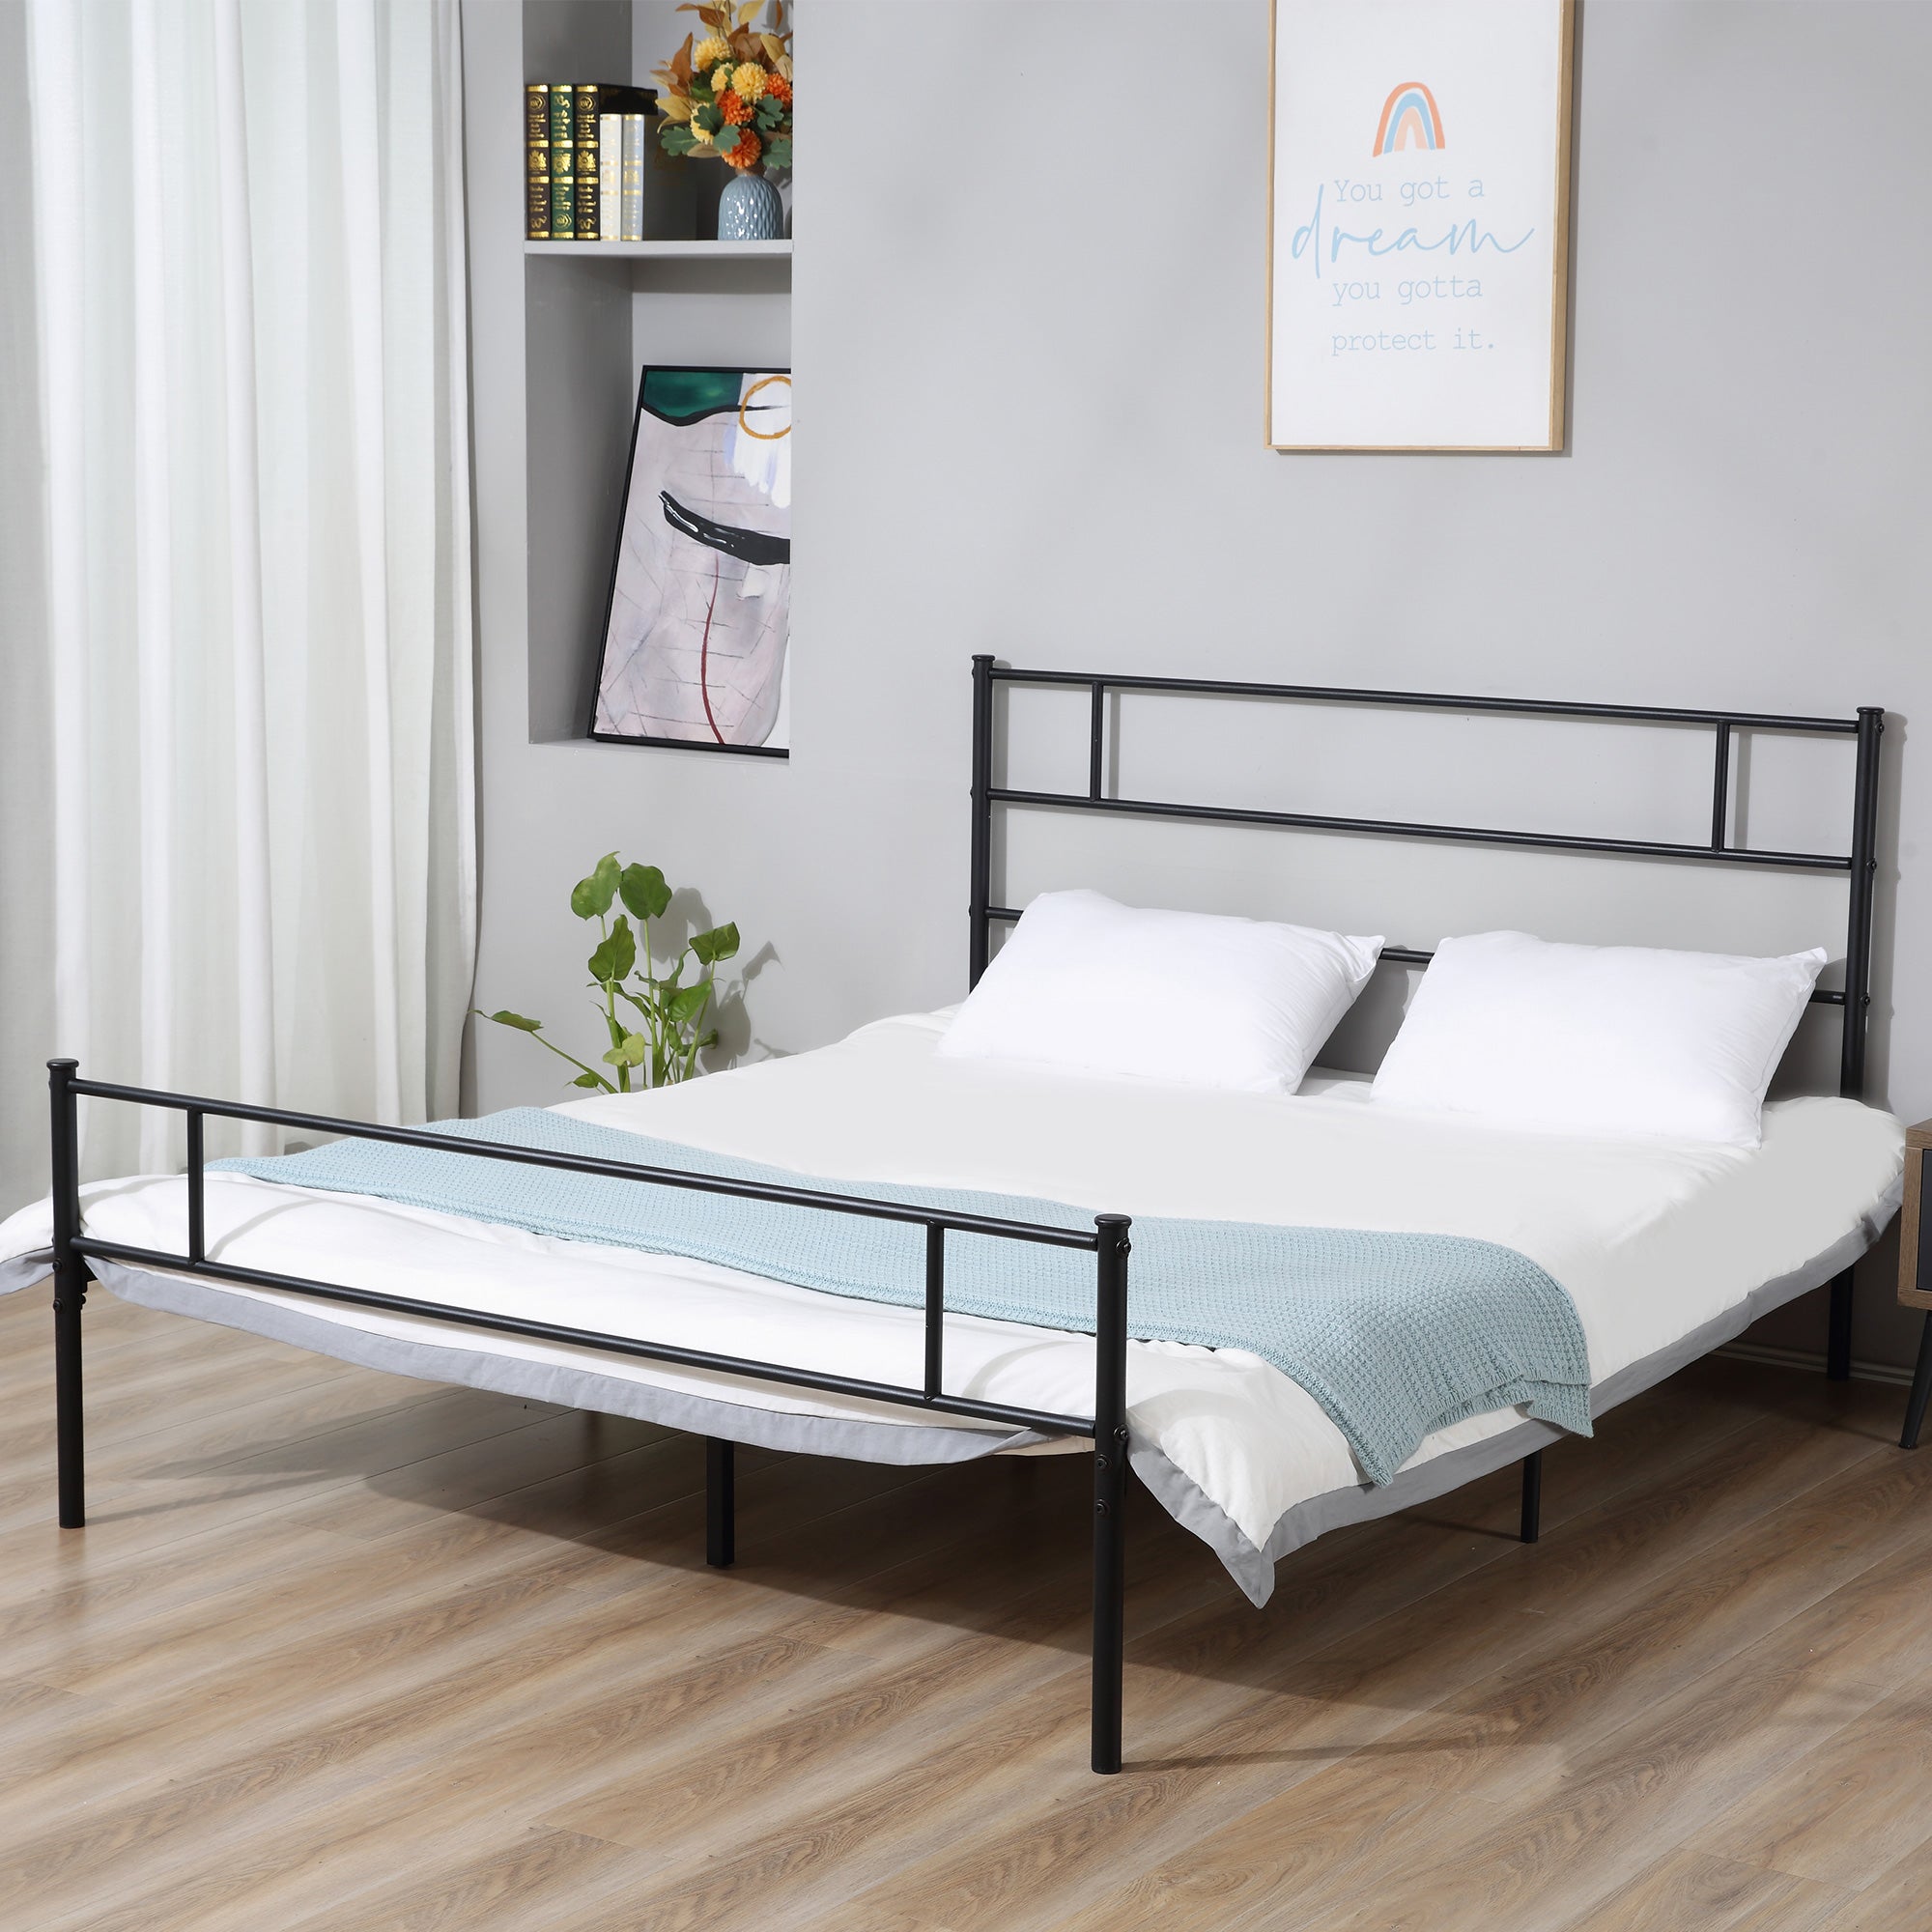 Double Metal Bed Frame with Headboard and Footboard, Underbed Storage Space Black - Inspirely